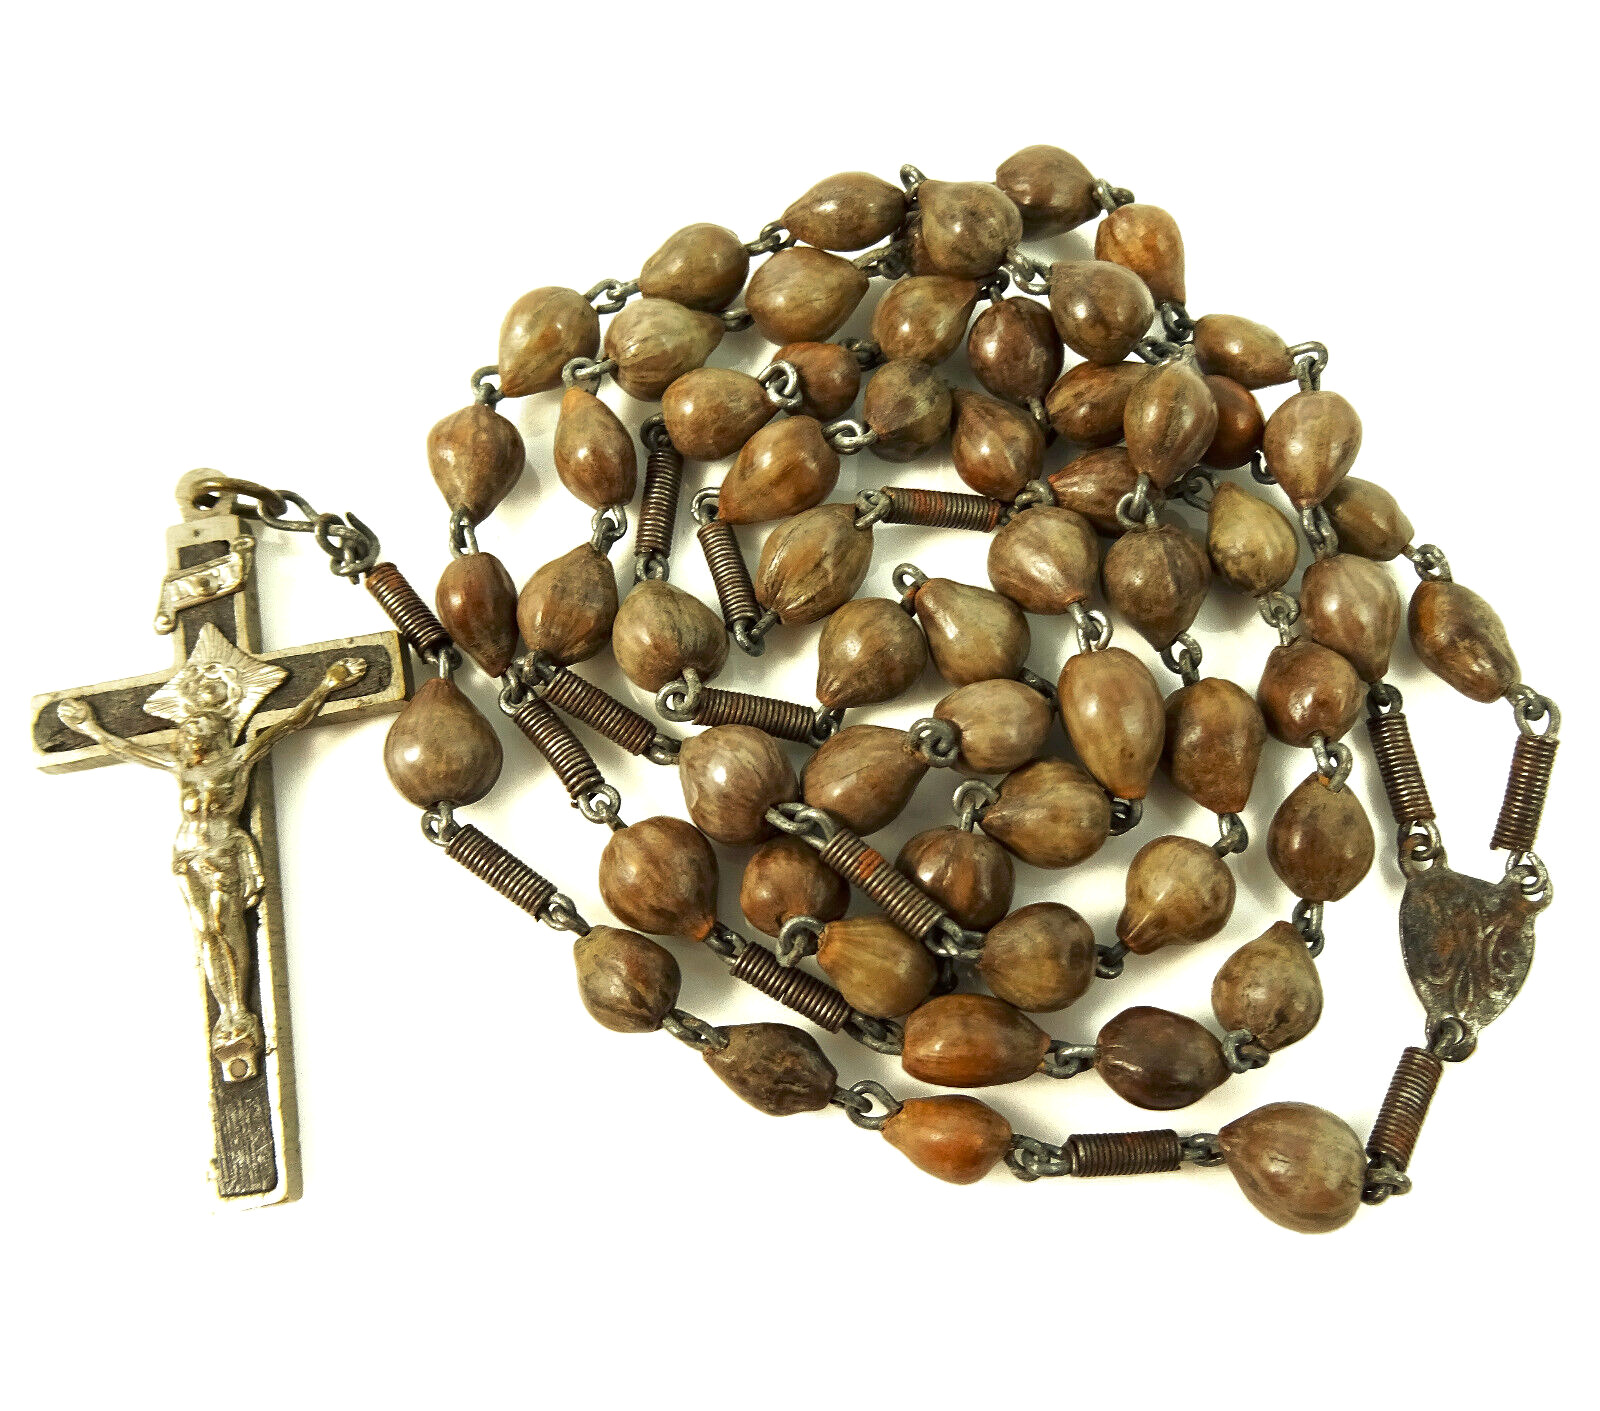 Antique Rosary Jobs Tears Seeds with Unusual Spiral Spring Spacers